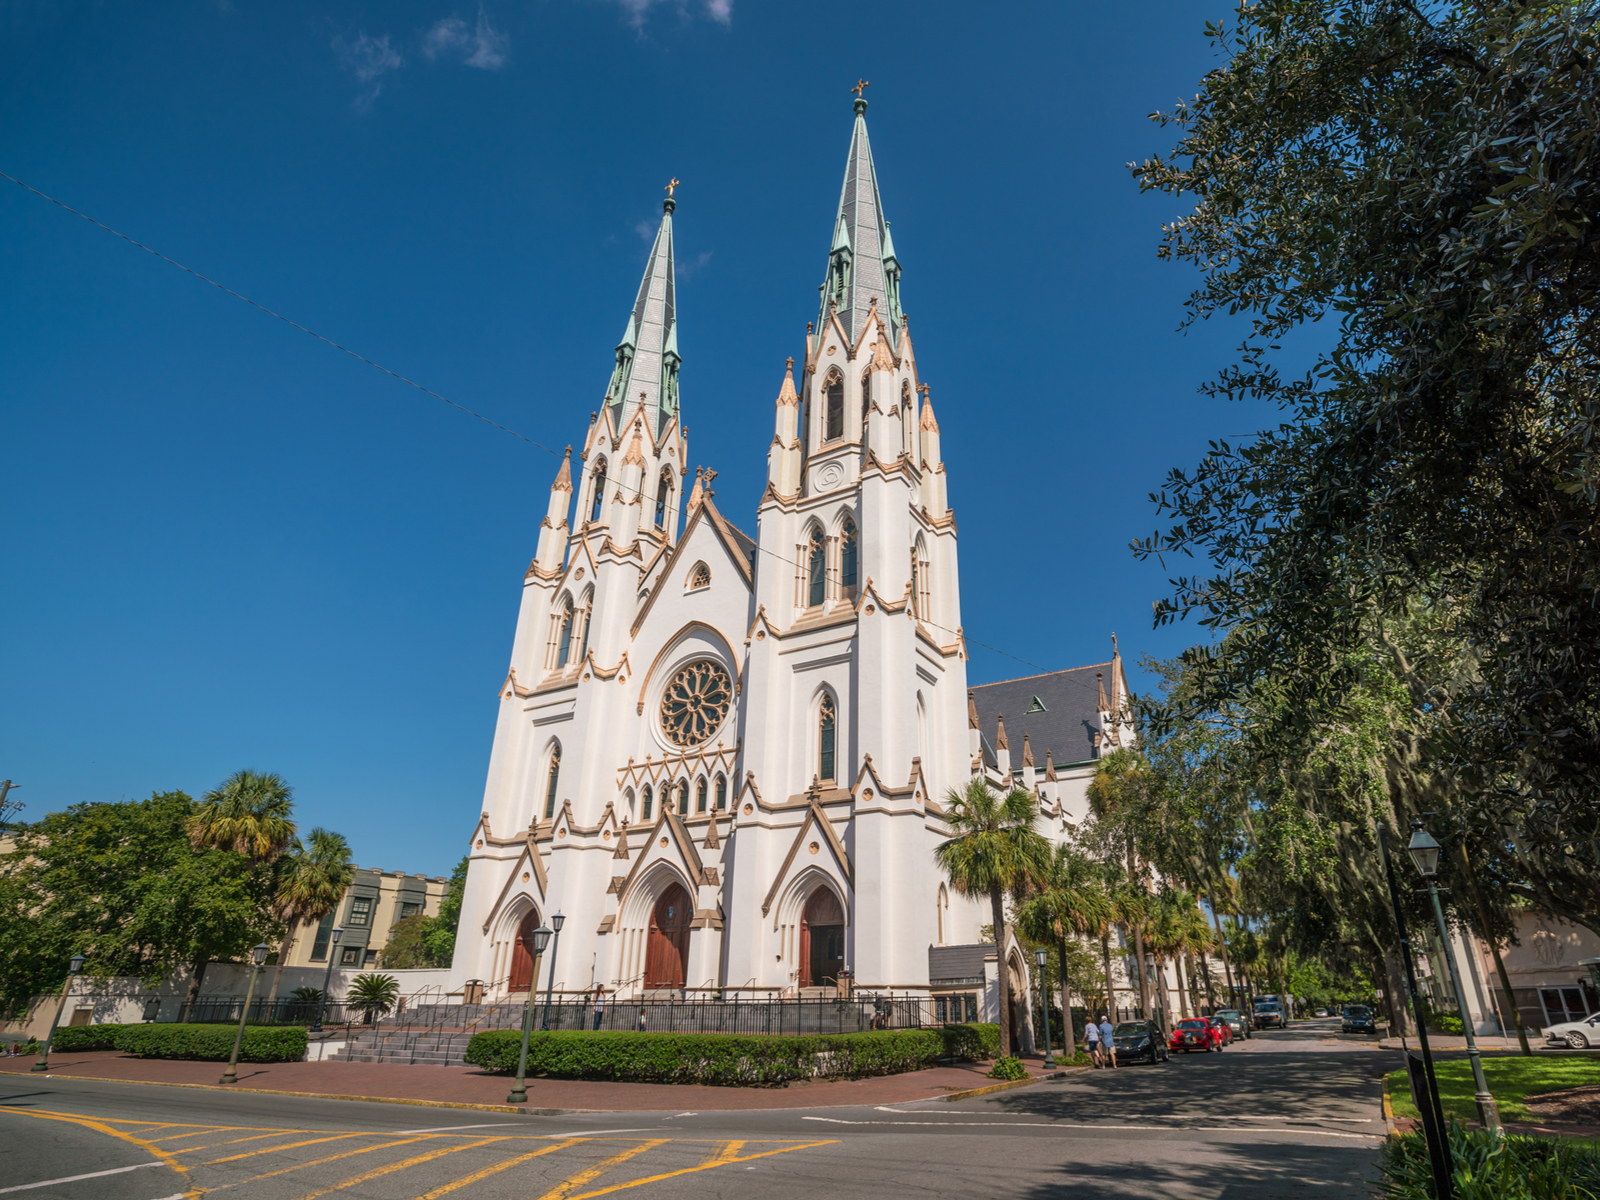 The Cathedral of St. John the Baptist, one of the best things to do in Savannah GA